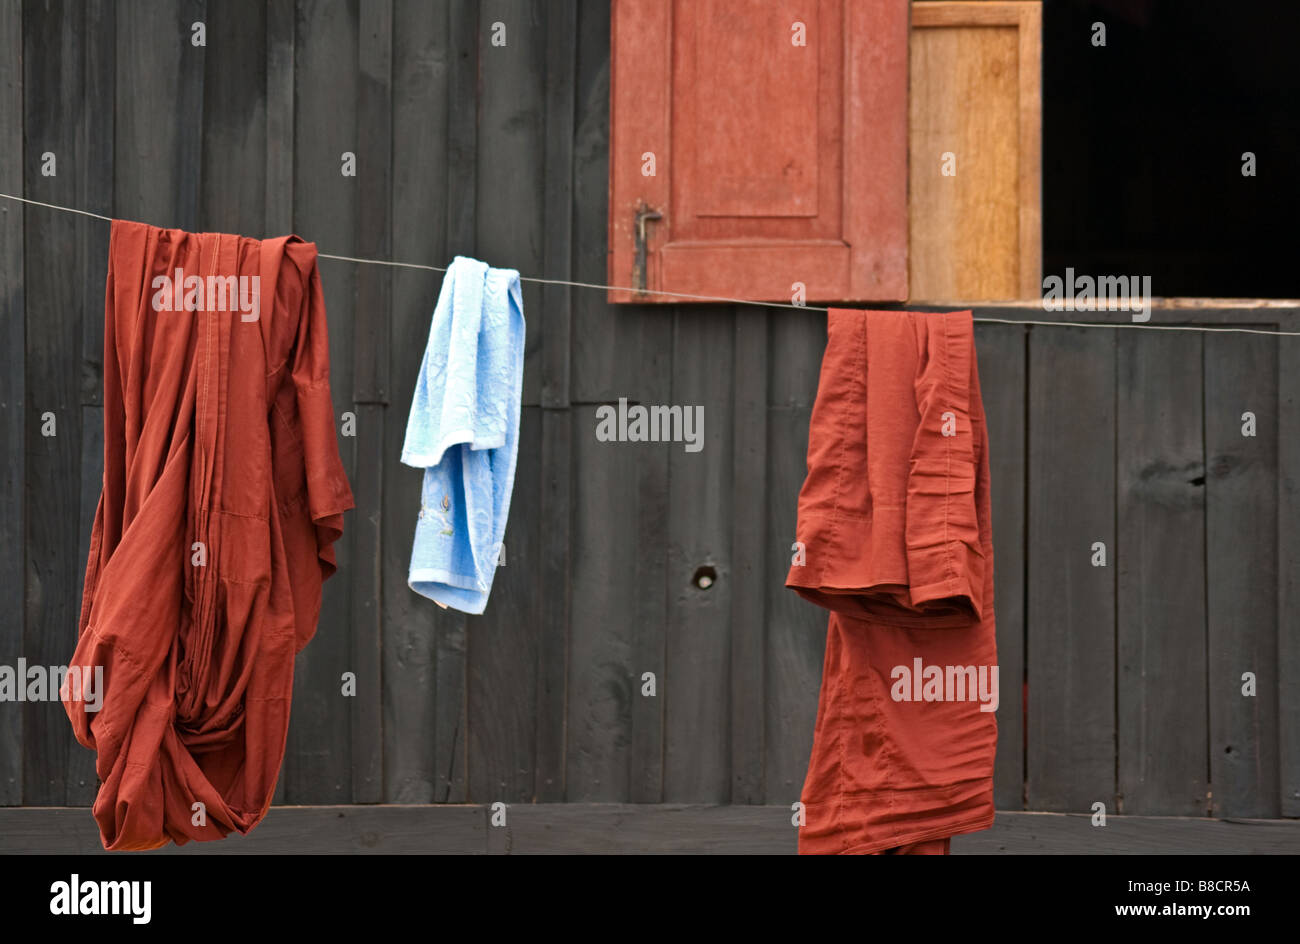 Robes of Buddhist monks hanging out to dry at a monastery in Kalaw, Myanmar (Burma) Stock Photo